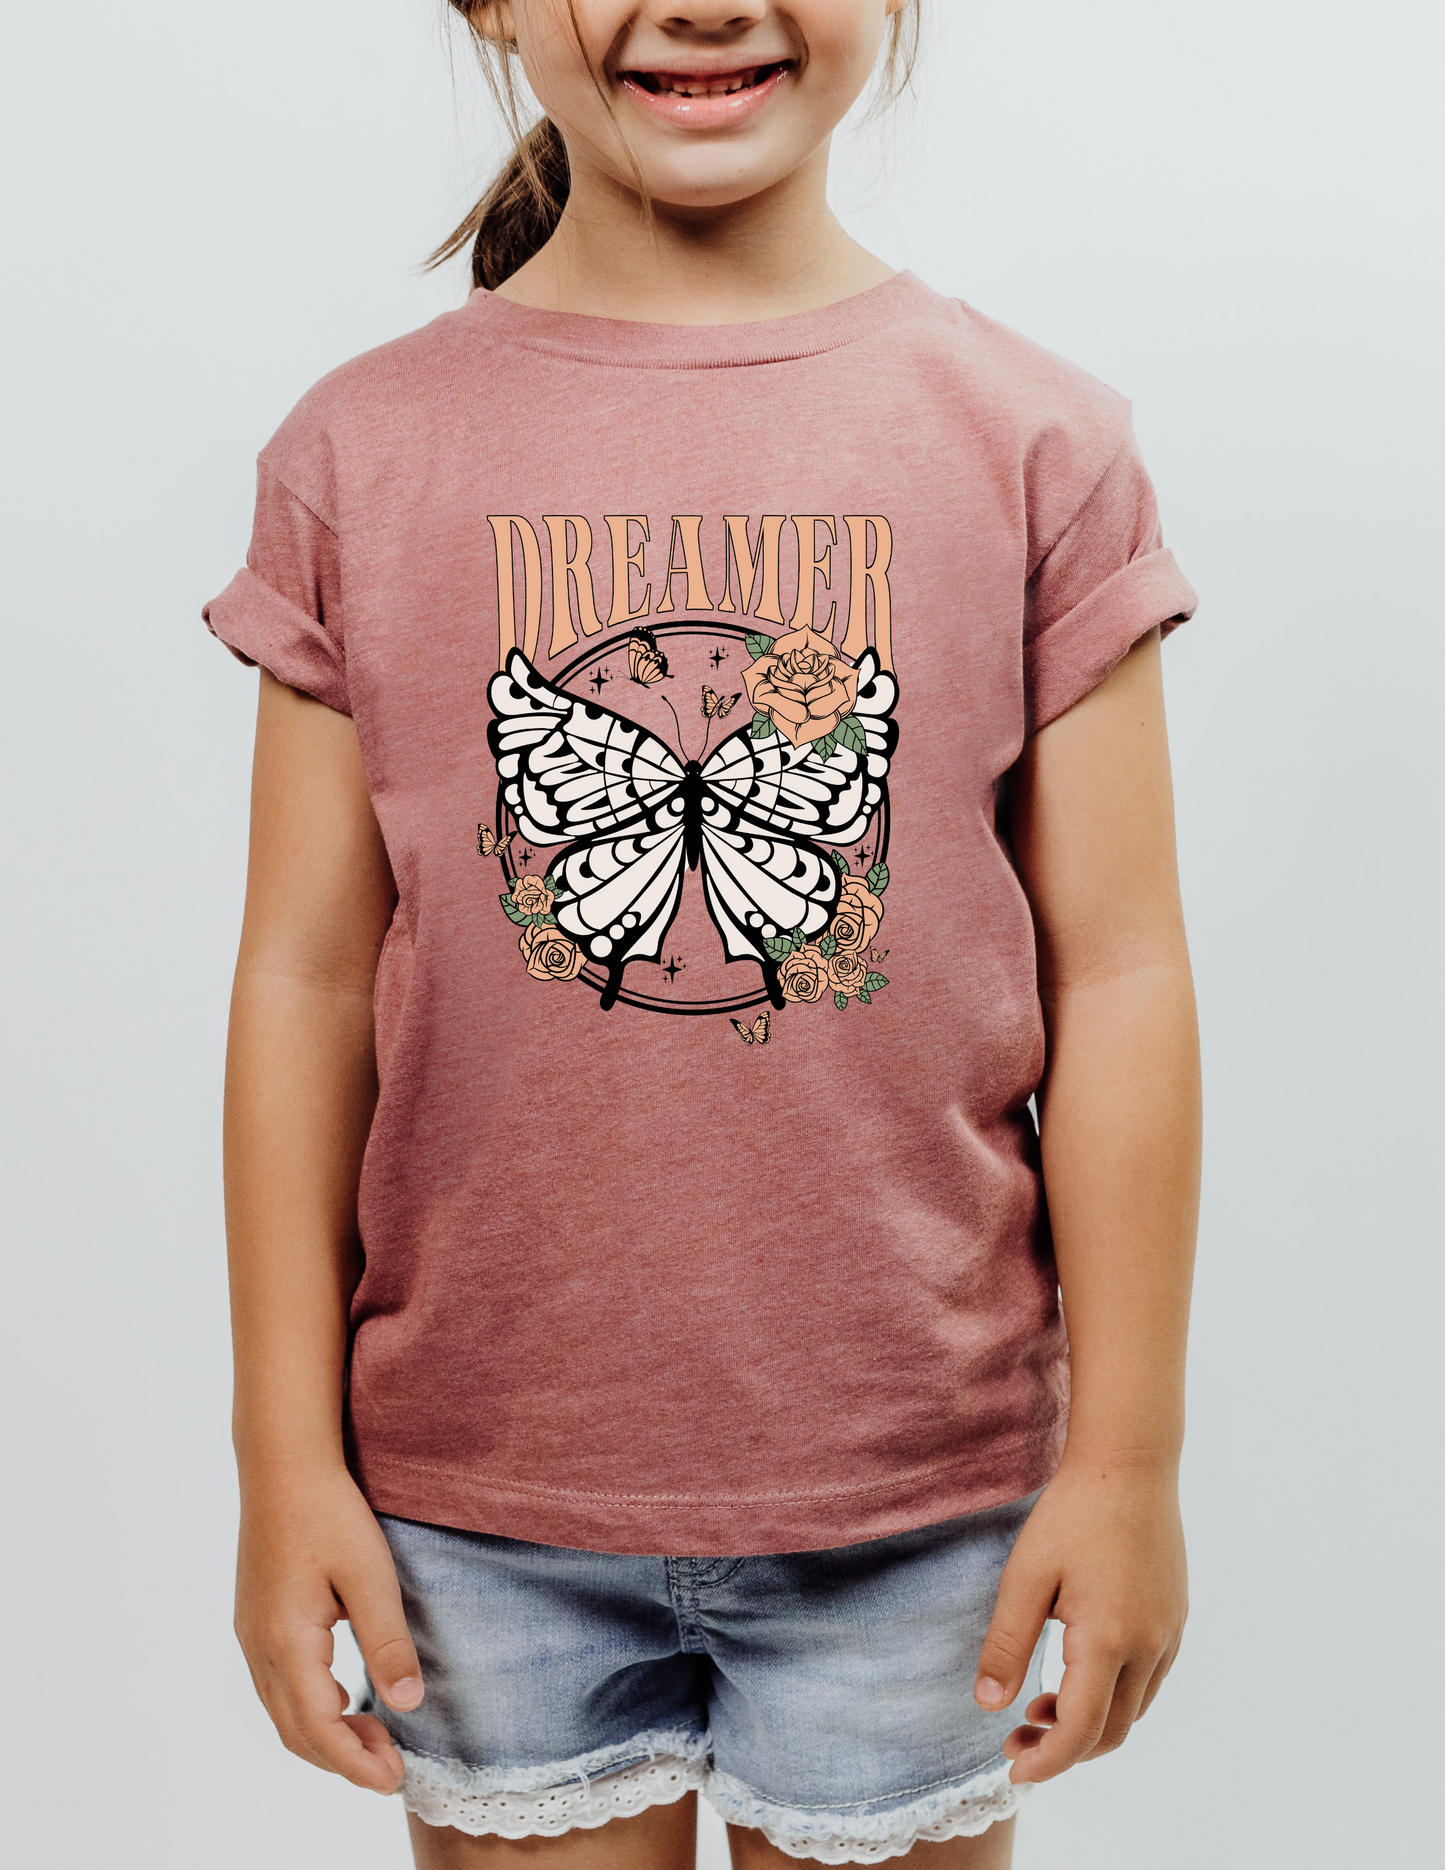 Youth Dreamer Vintage Graphic